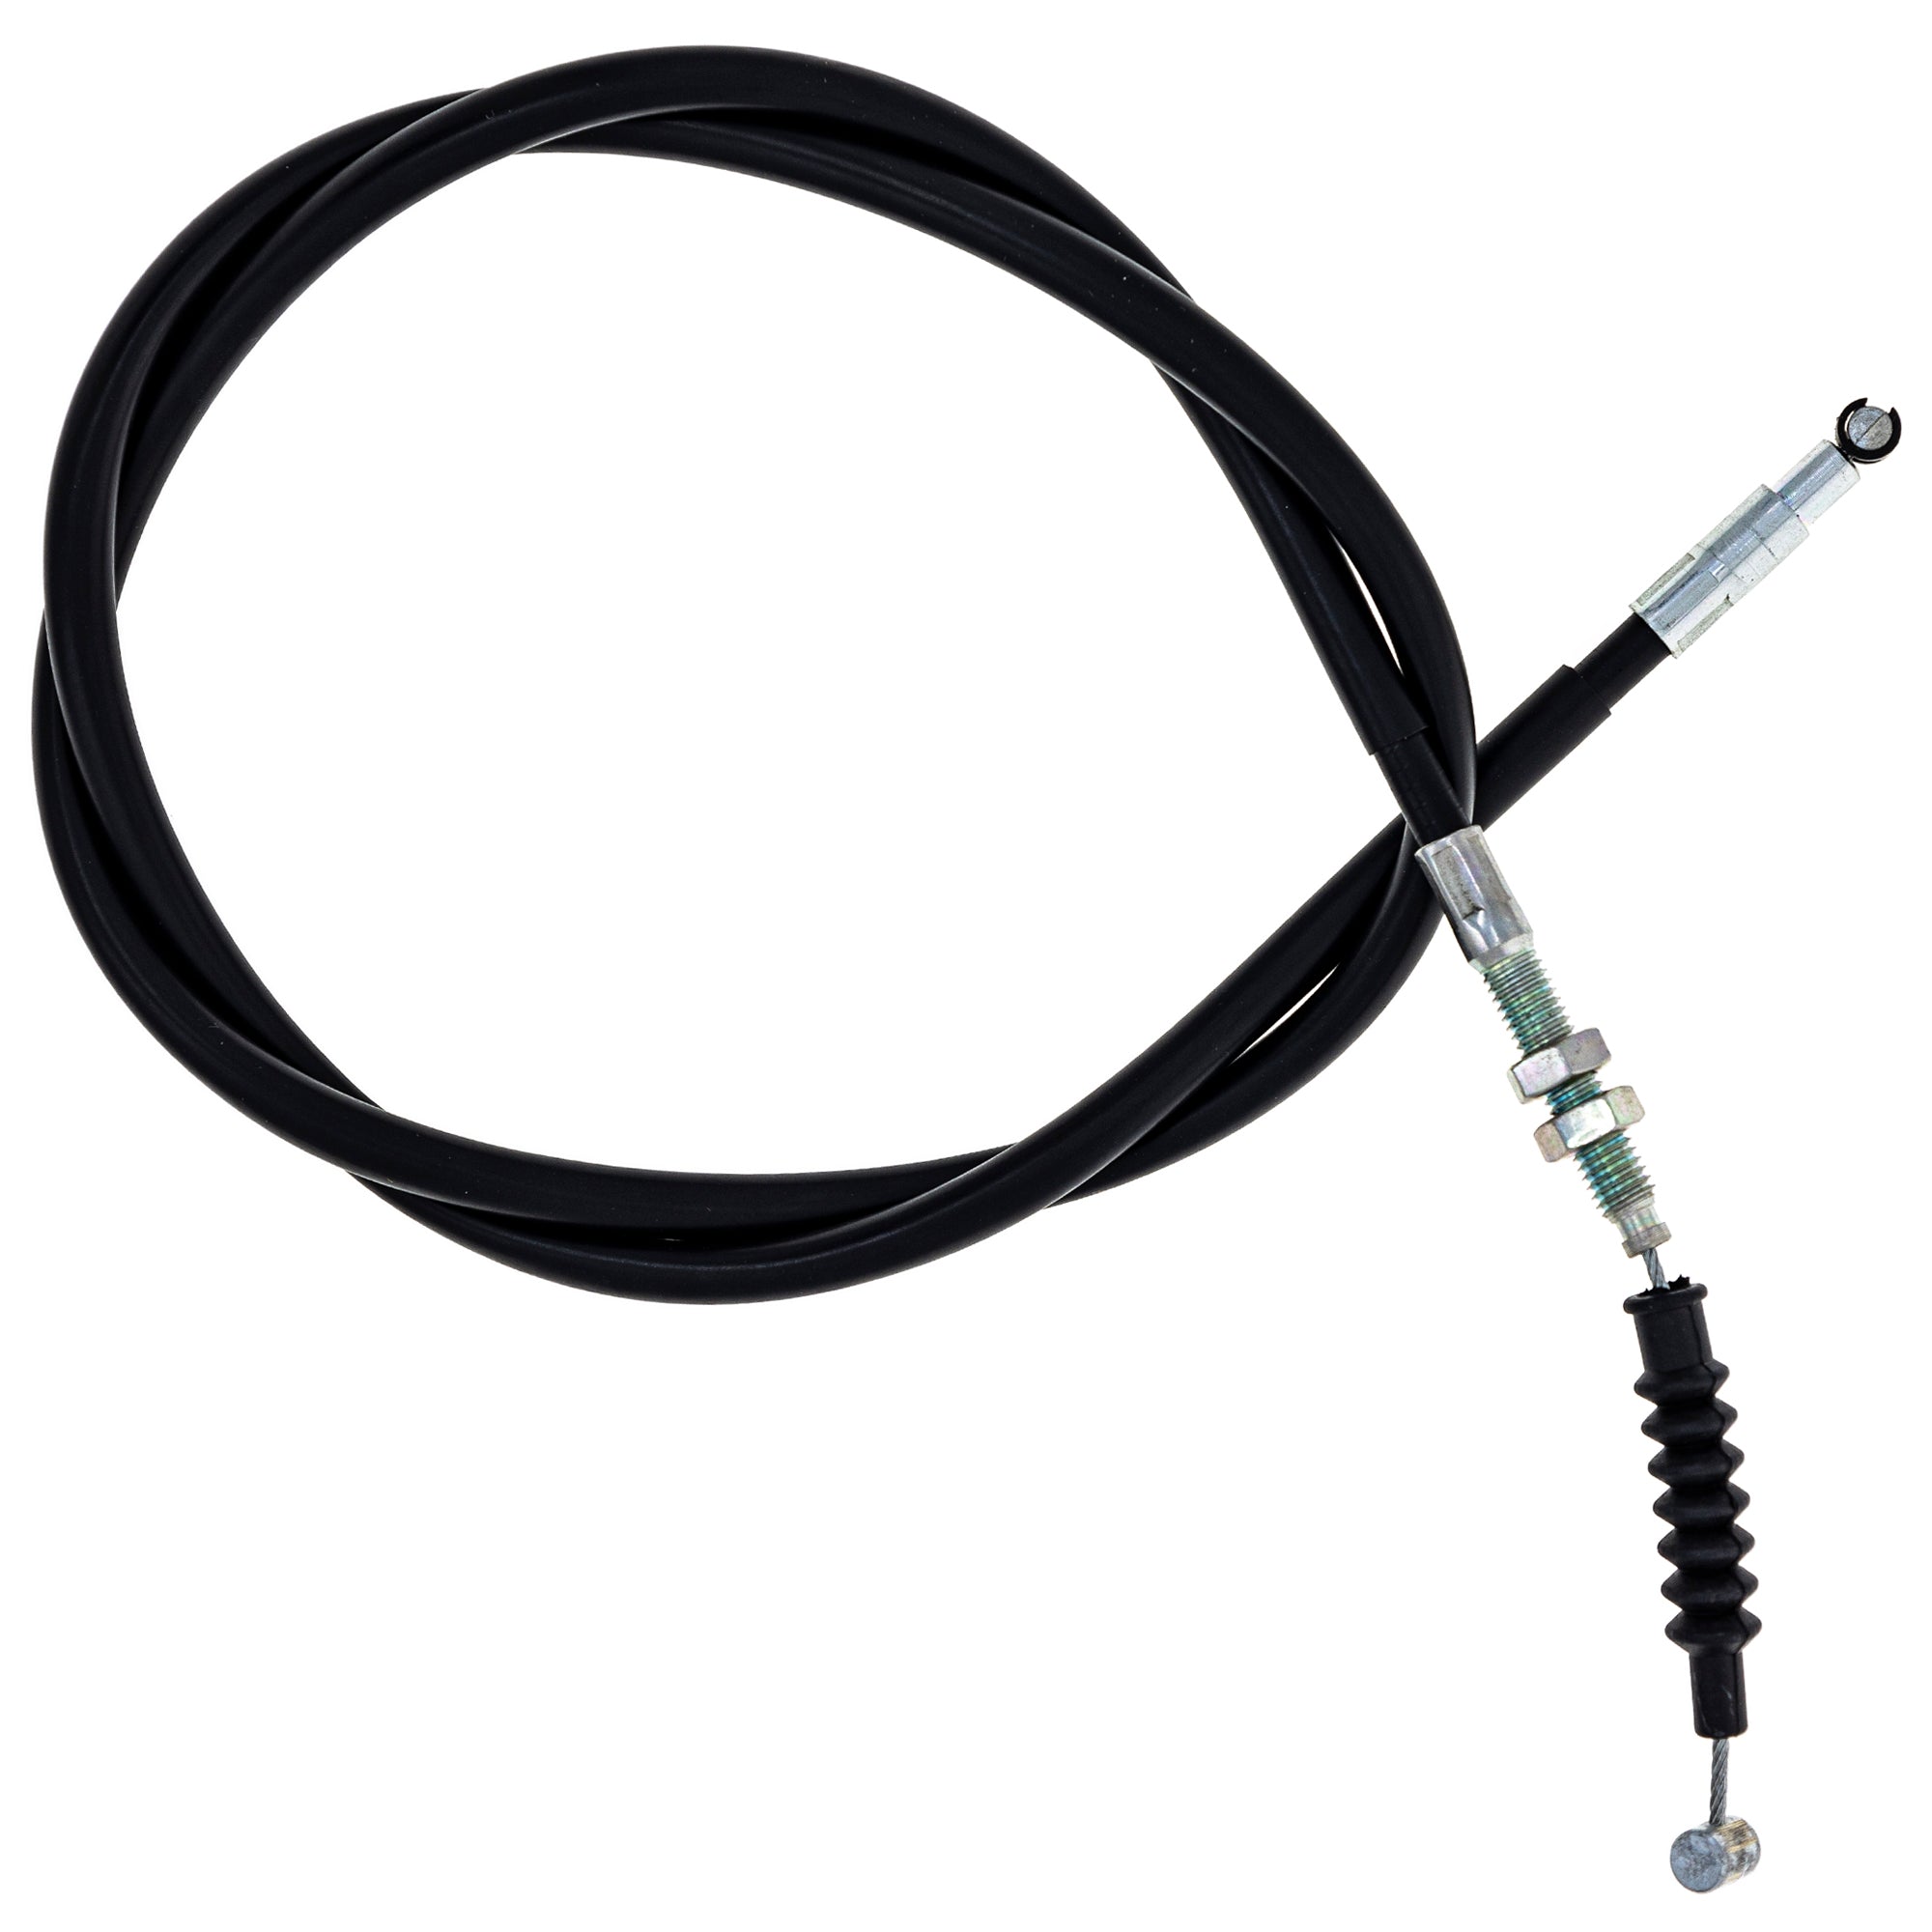 Clutch Cable for zOTHER YZ450F WR450F NICHE 519-CCB2786L